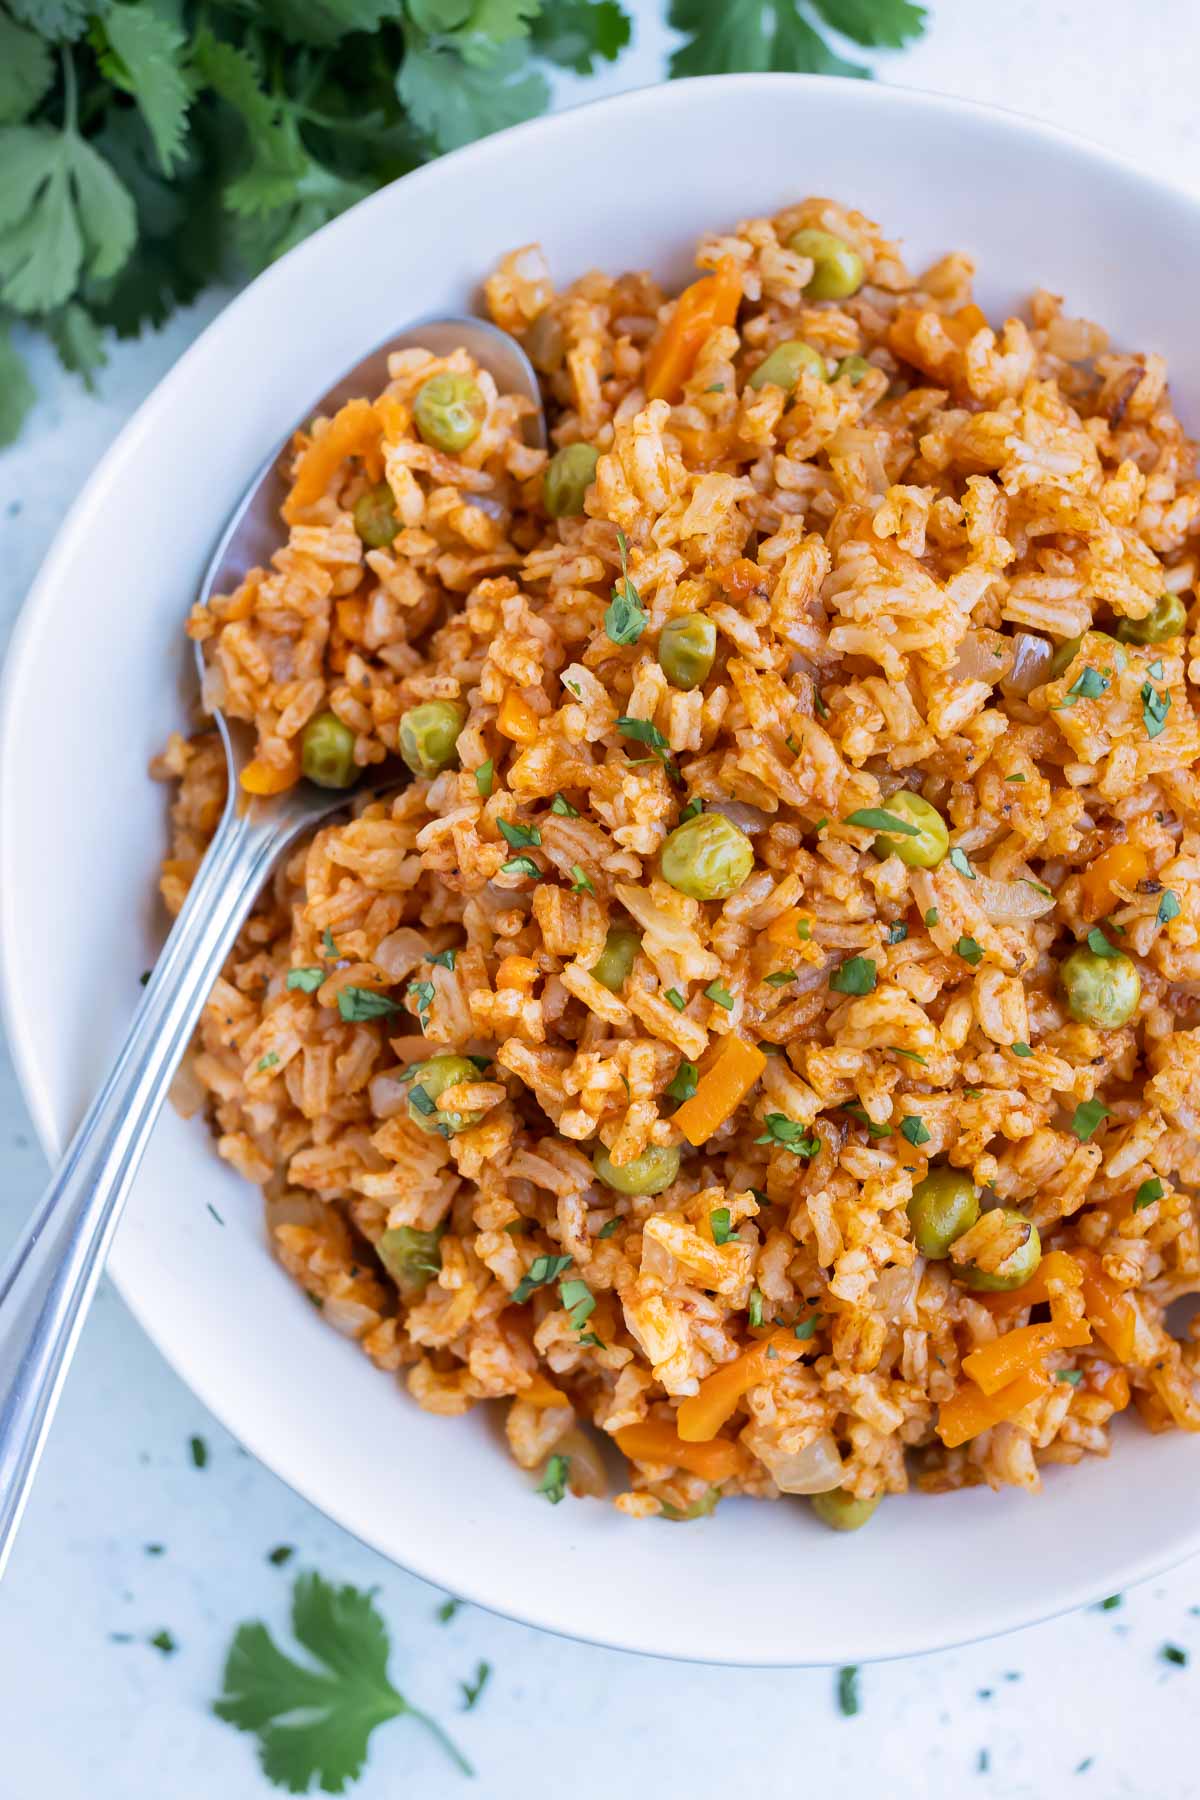 Mexican rice is plated for a fluffy and flavorful, easy side.